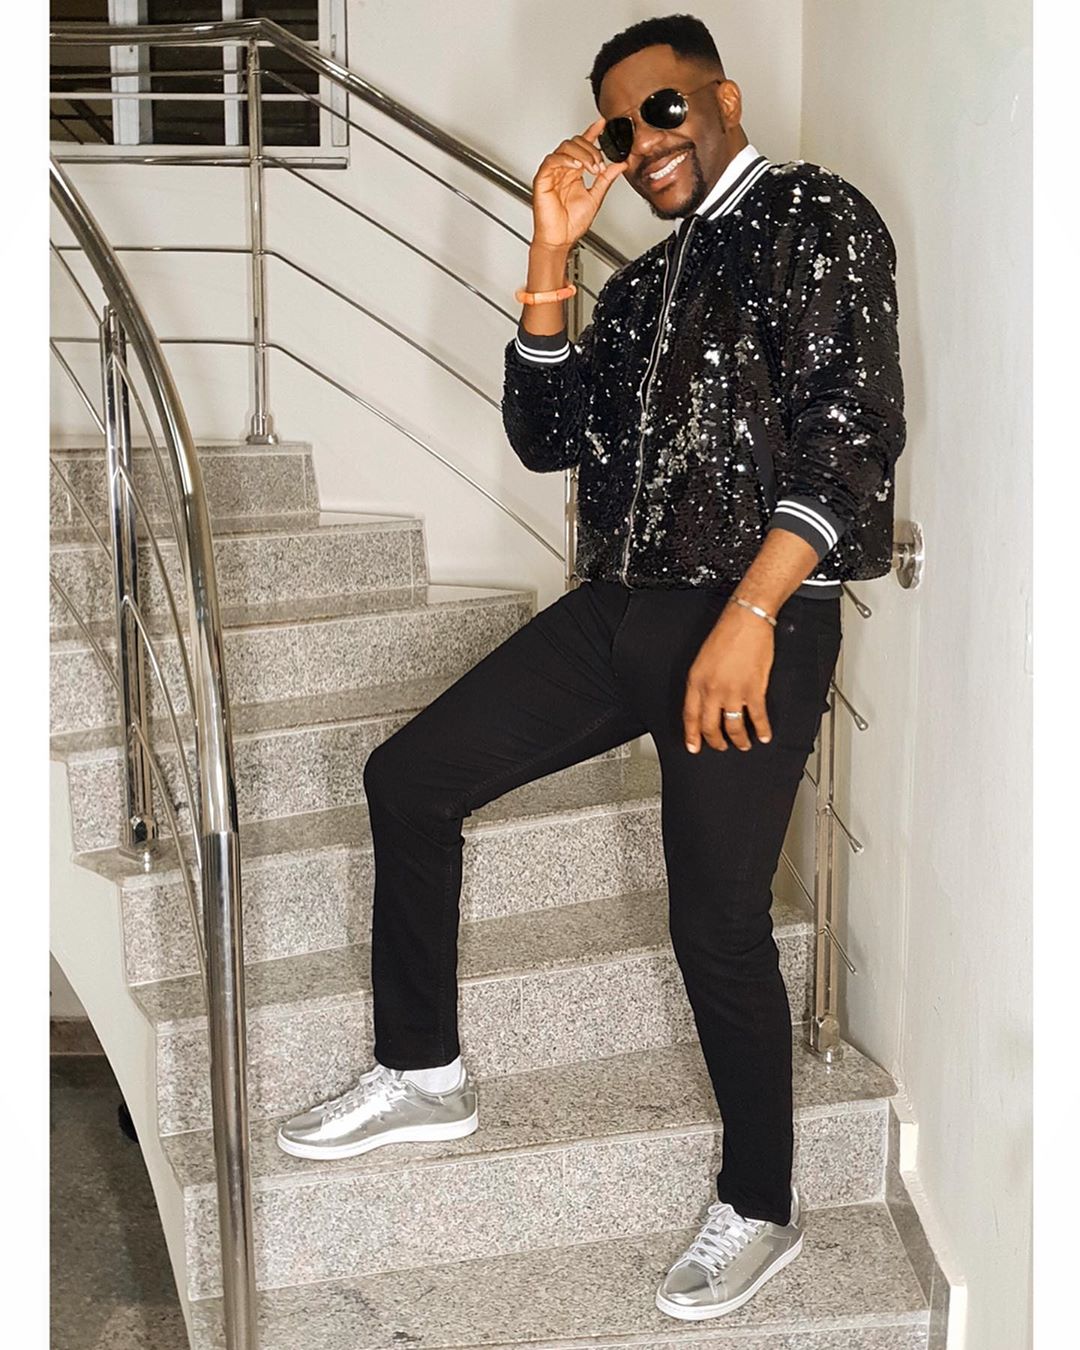 Renowned TV host, Ebuka is nothing short of hot as he had an amazing year. From signing endorsement deals to hosting the biggest reality TV show in Nigeria, Ebuka served us career goals. [Instagram/Ebuka]